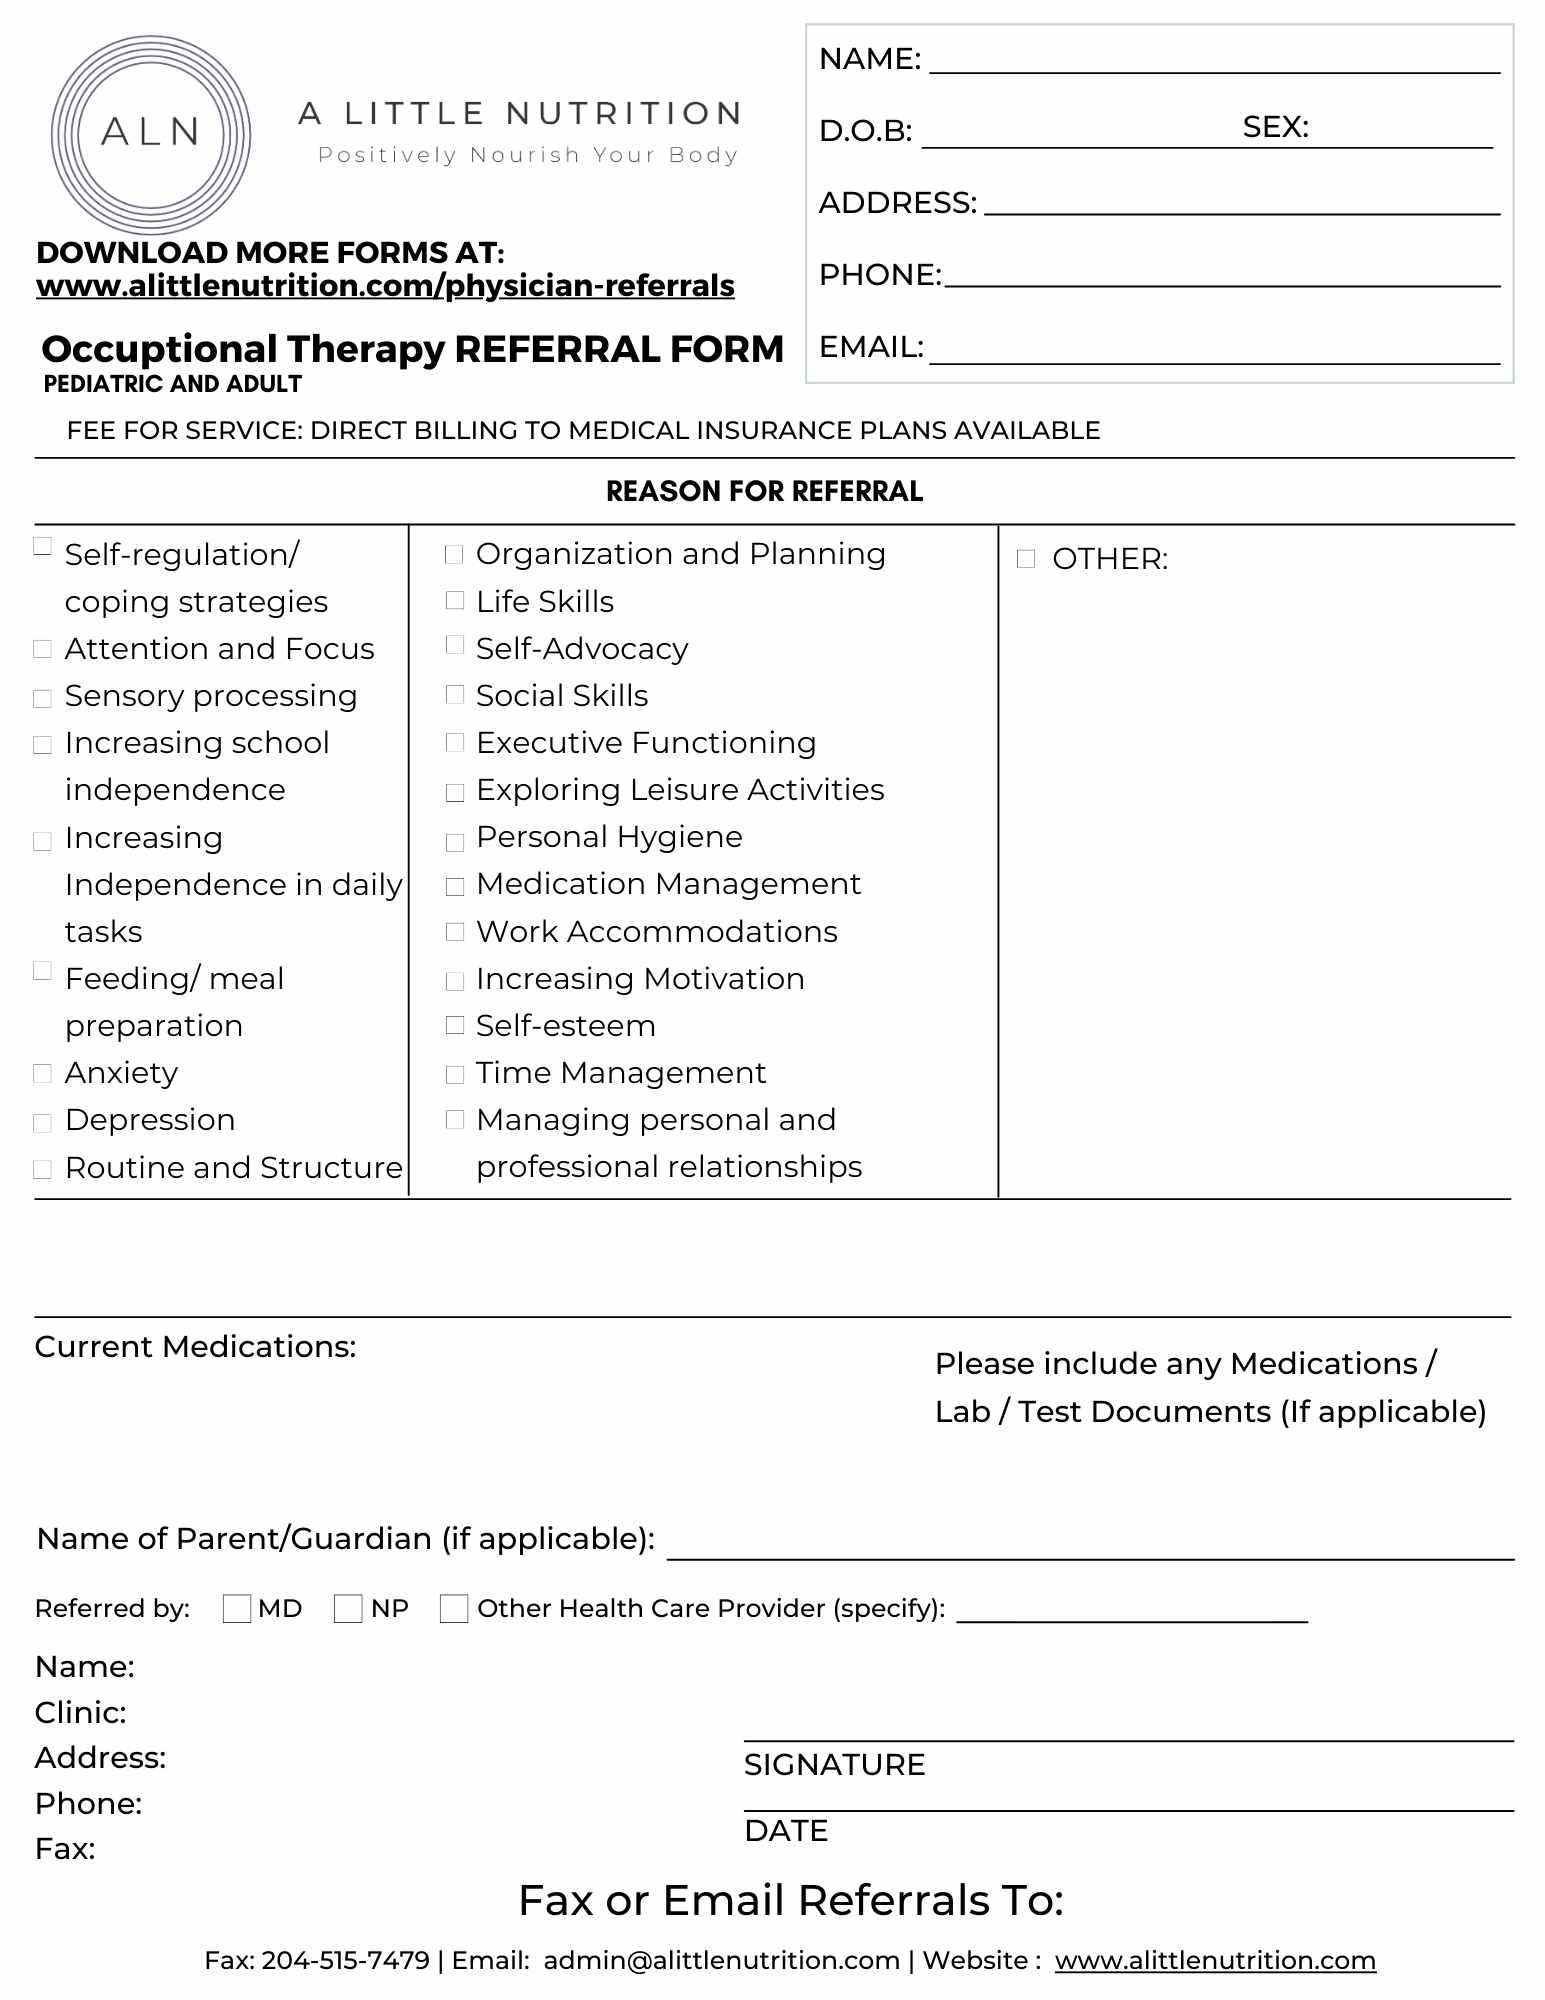 occuptational therapy referral form